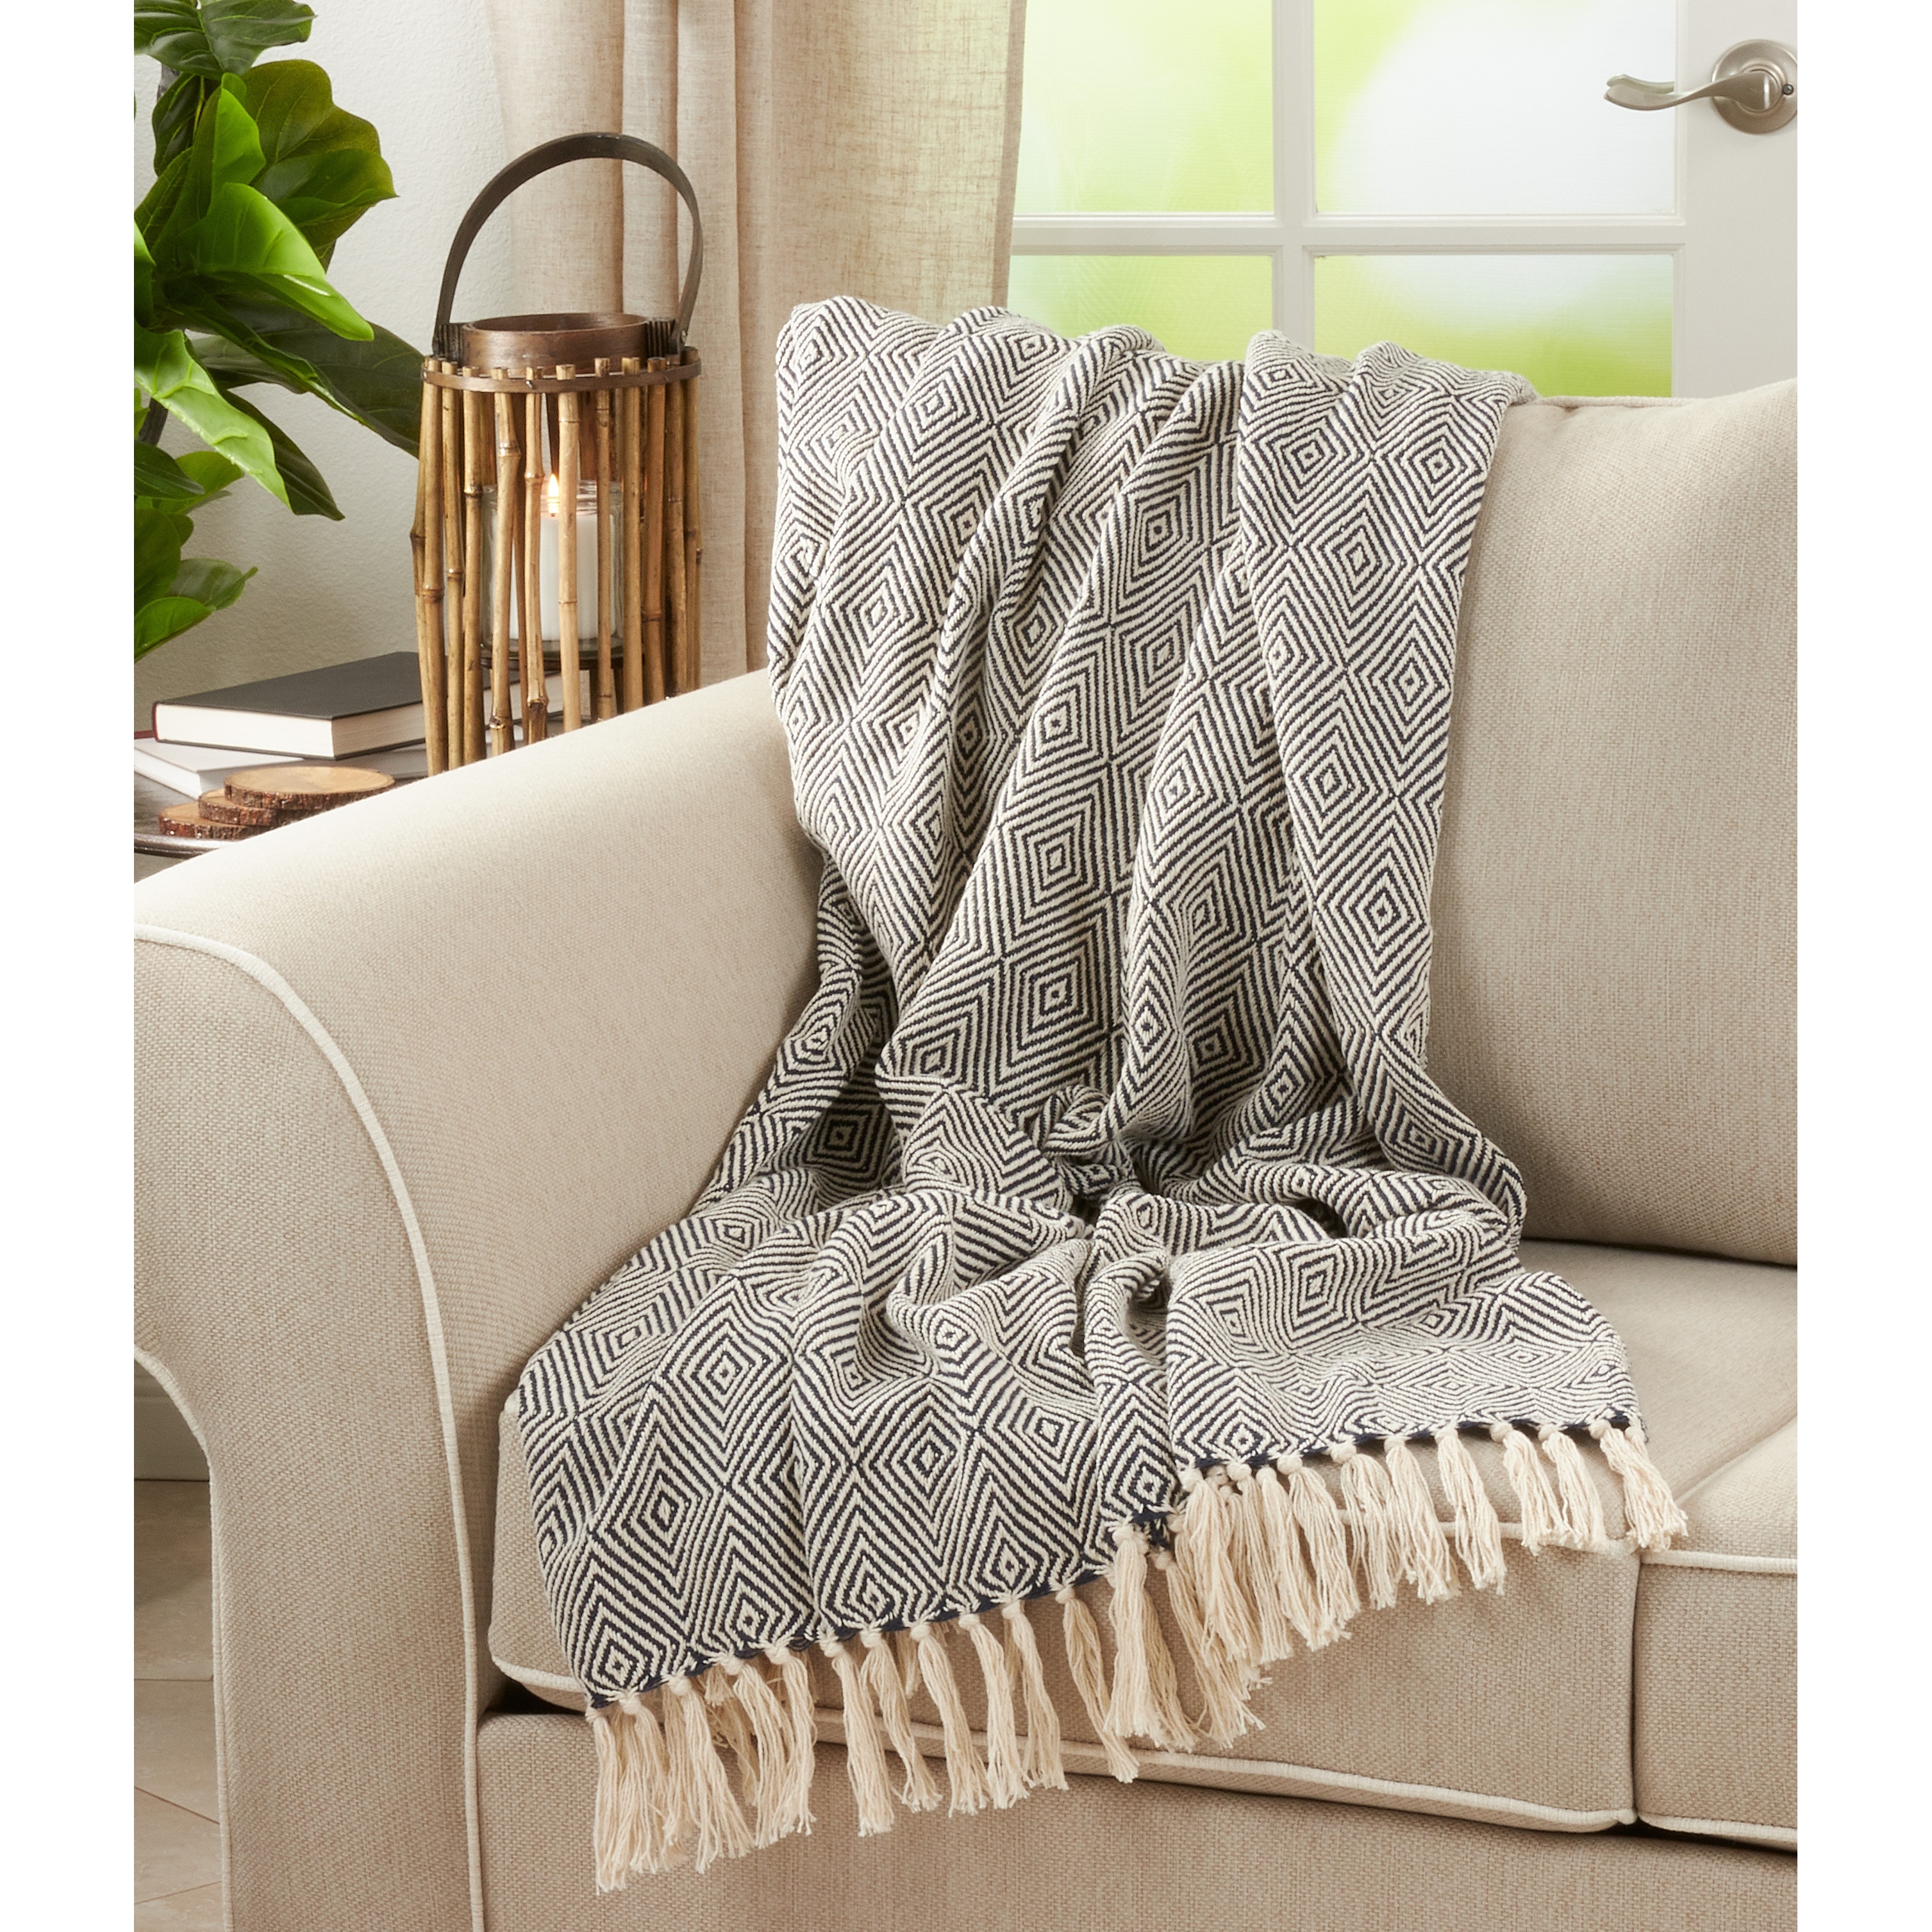 Rustic Blankets and Throws | Shop our Best Blankets Deals Online at Bed ...